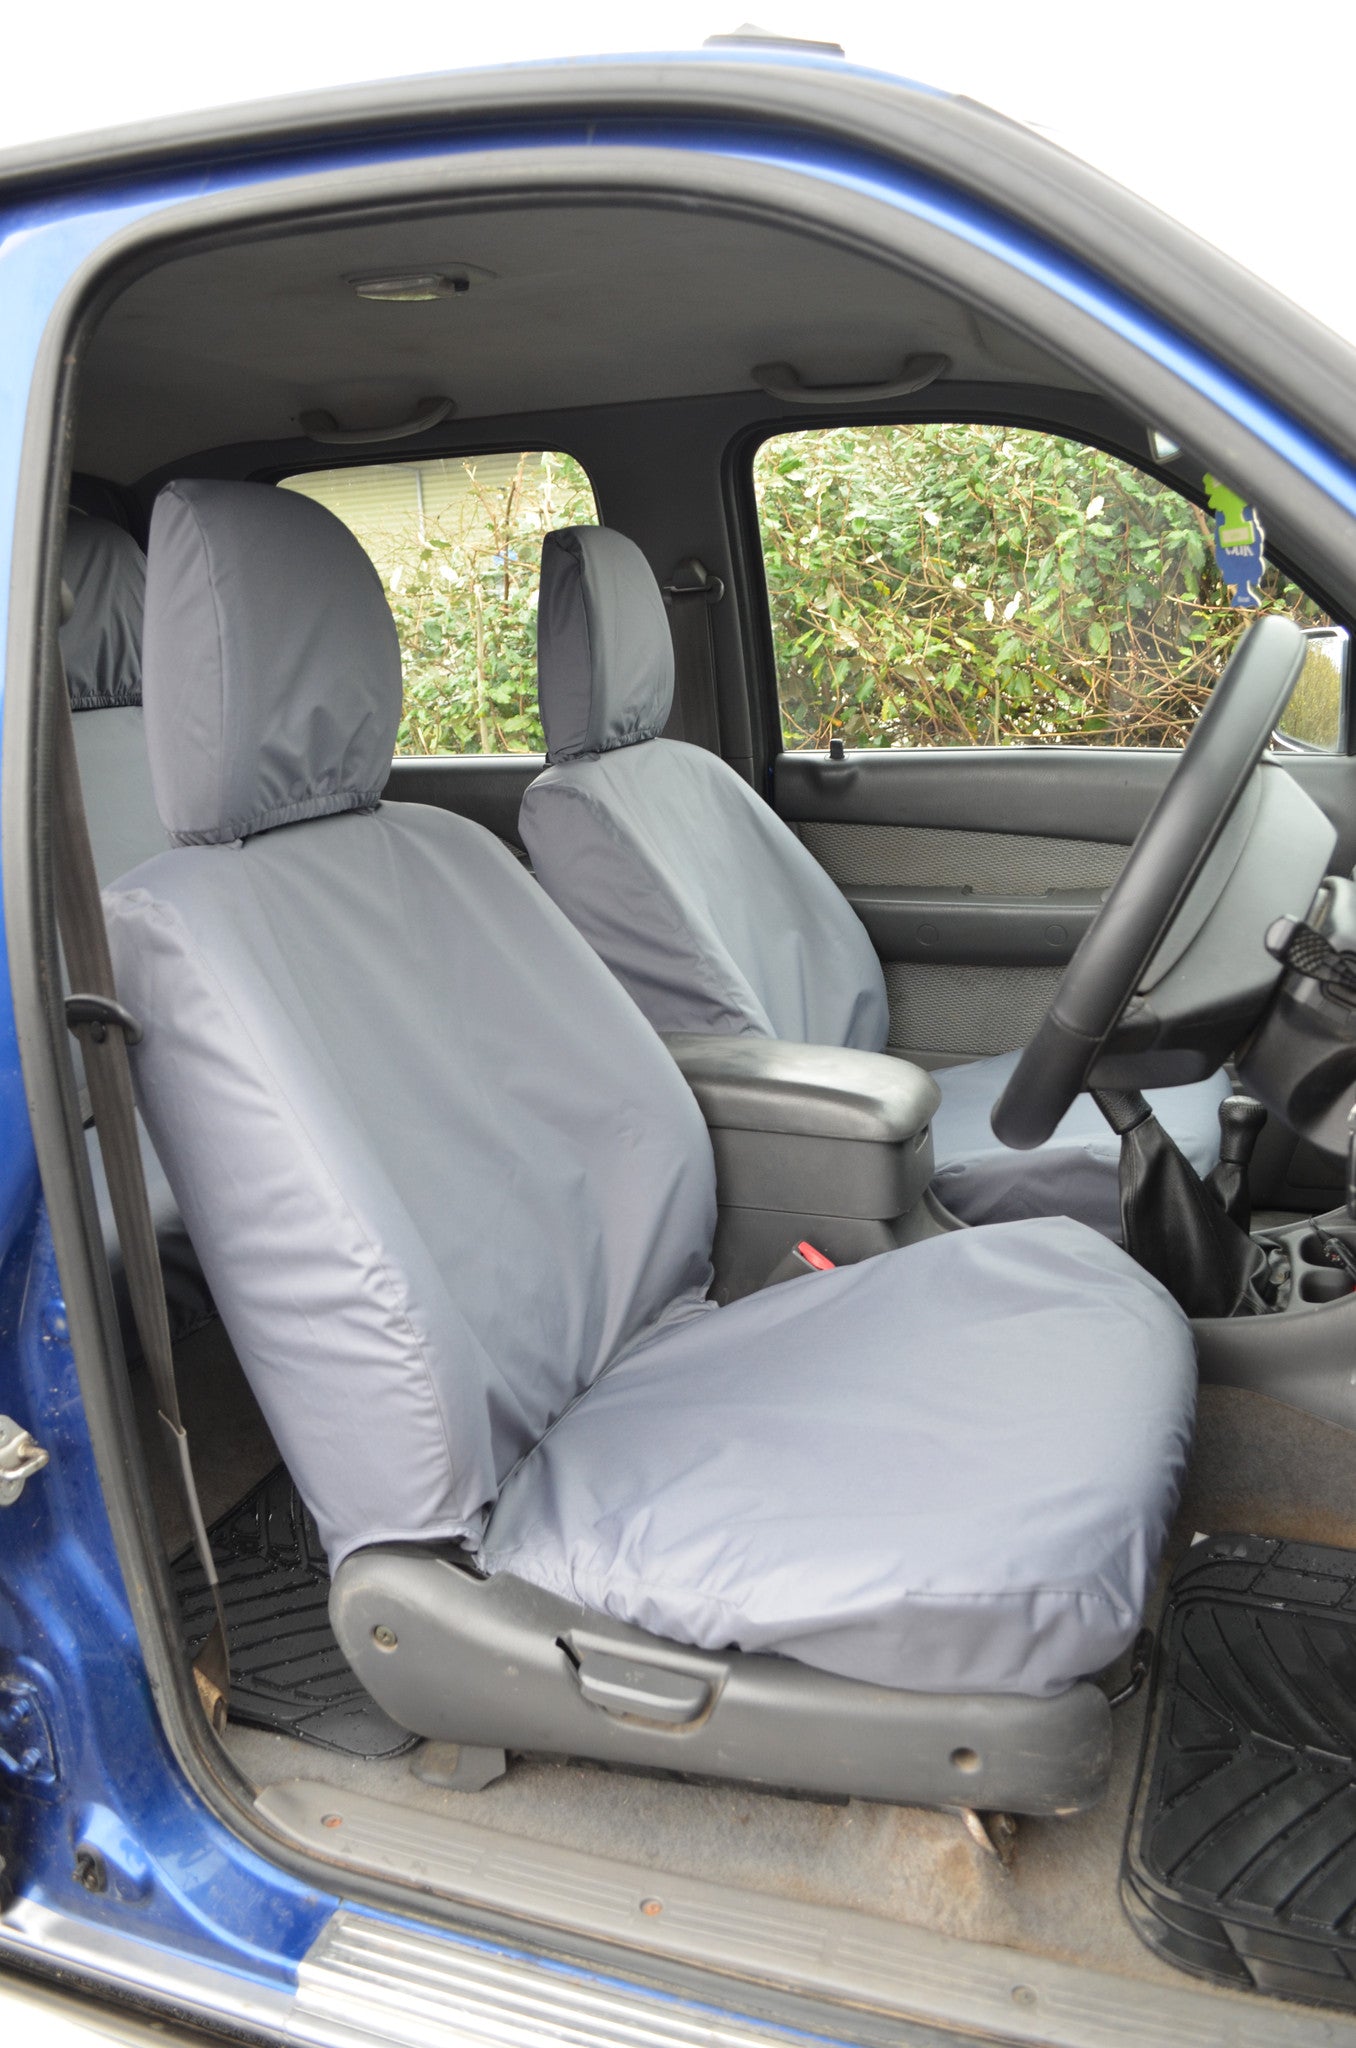 Ford Ranger 1999 to 2006 Seat Covers Front Pair Seat Covers / Grey Turtle Covers Ltd